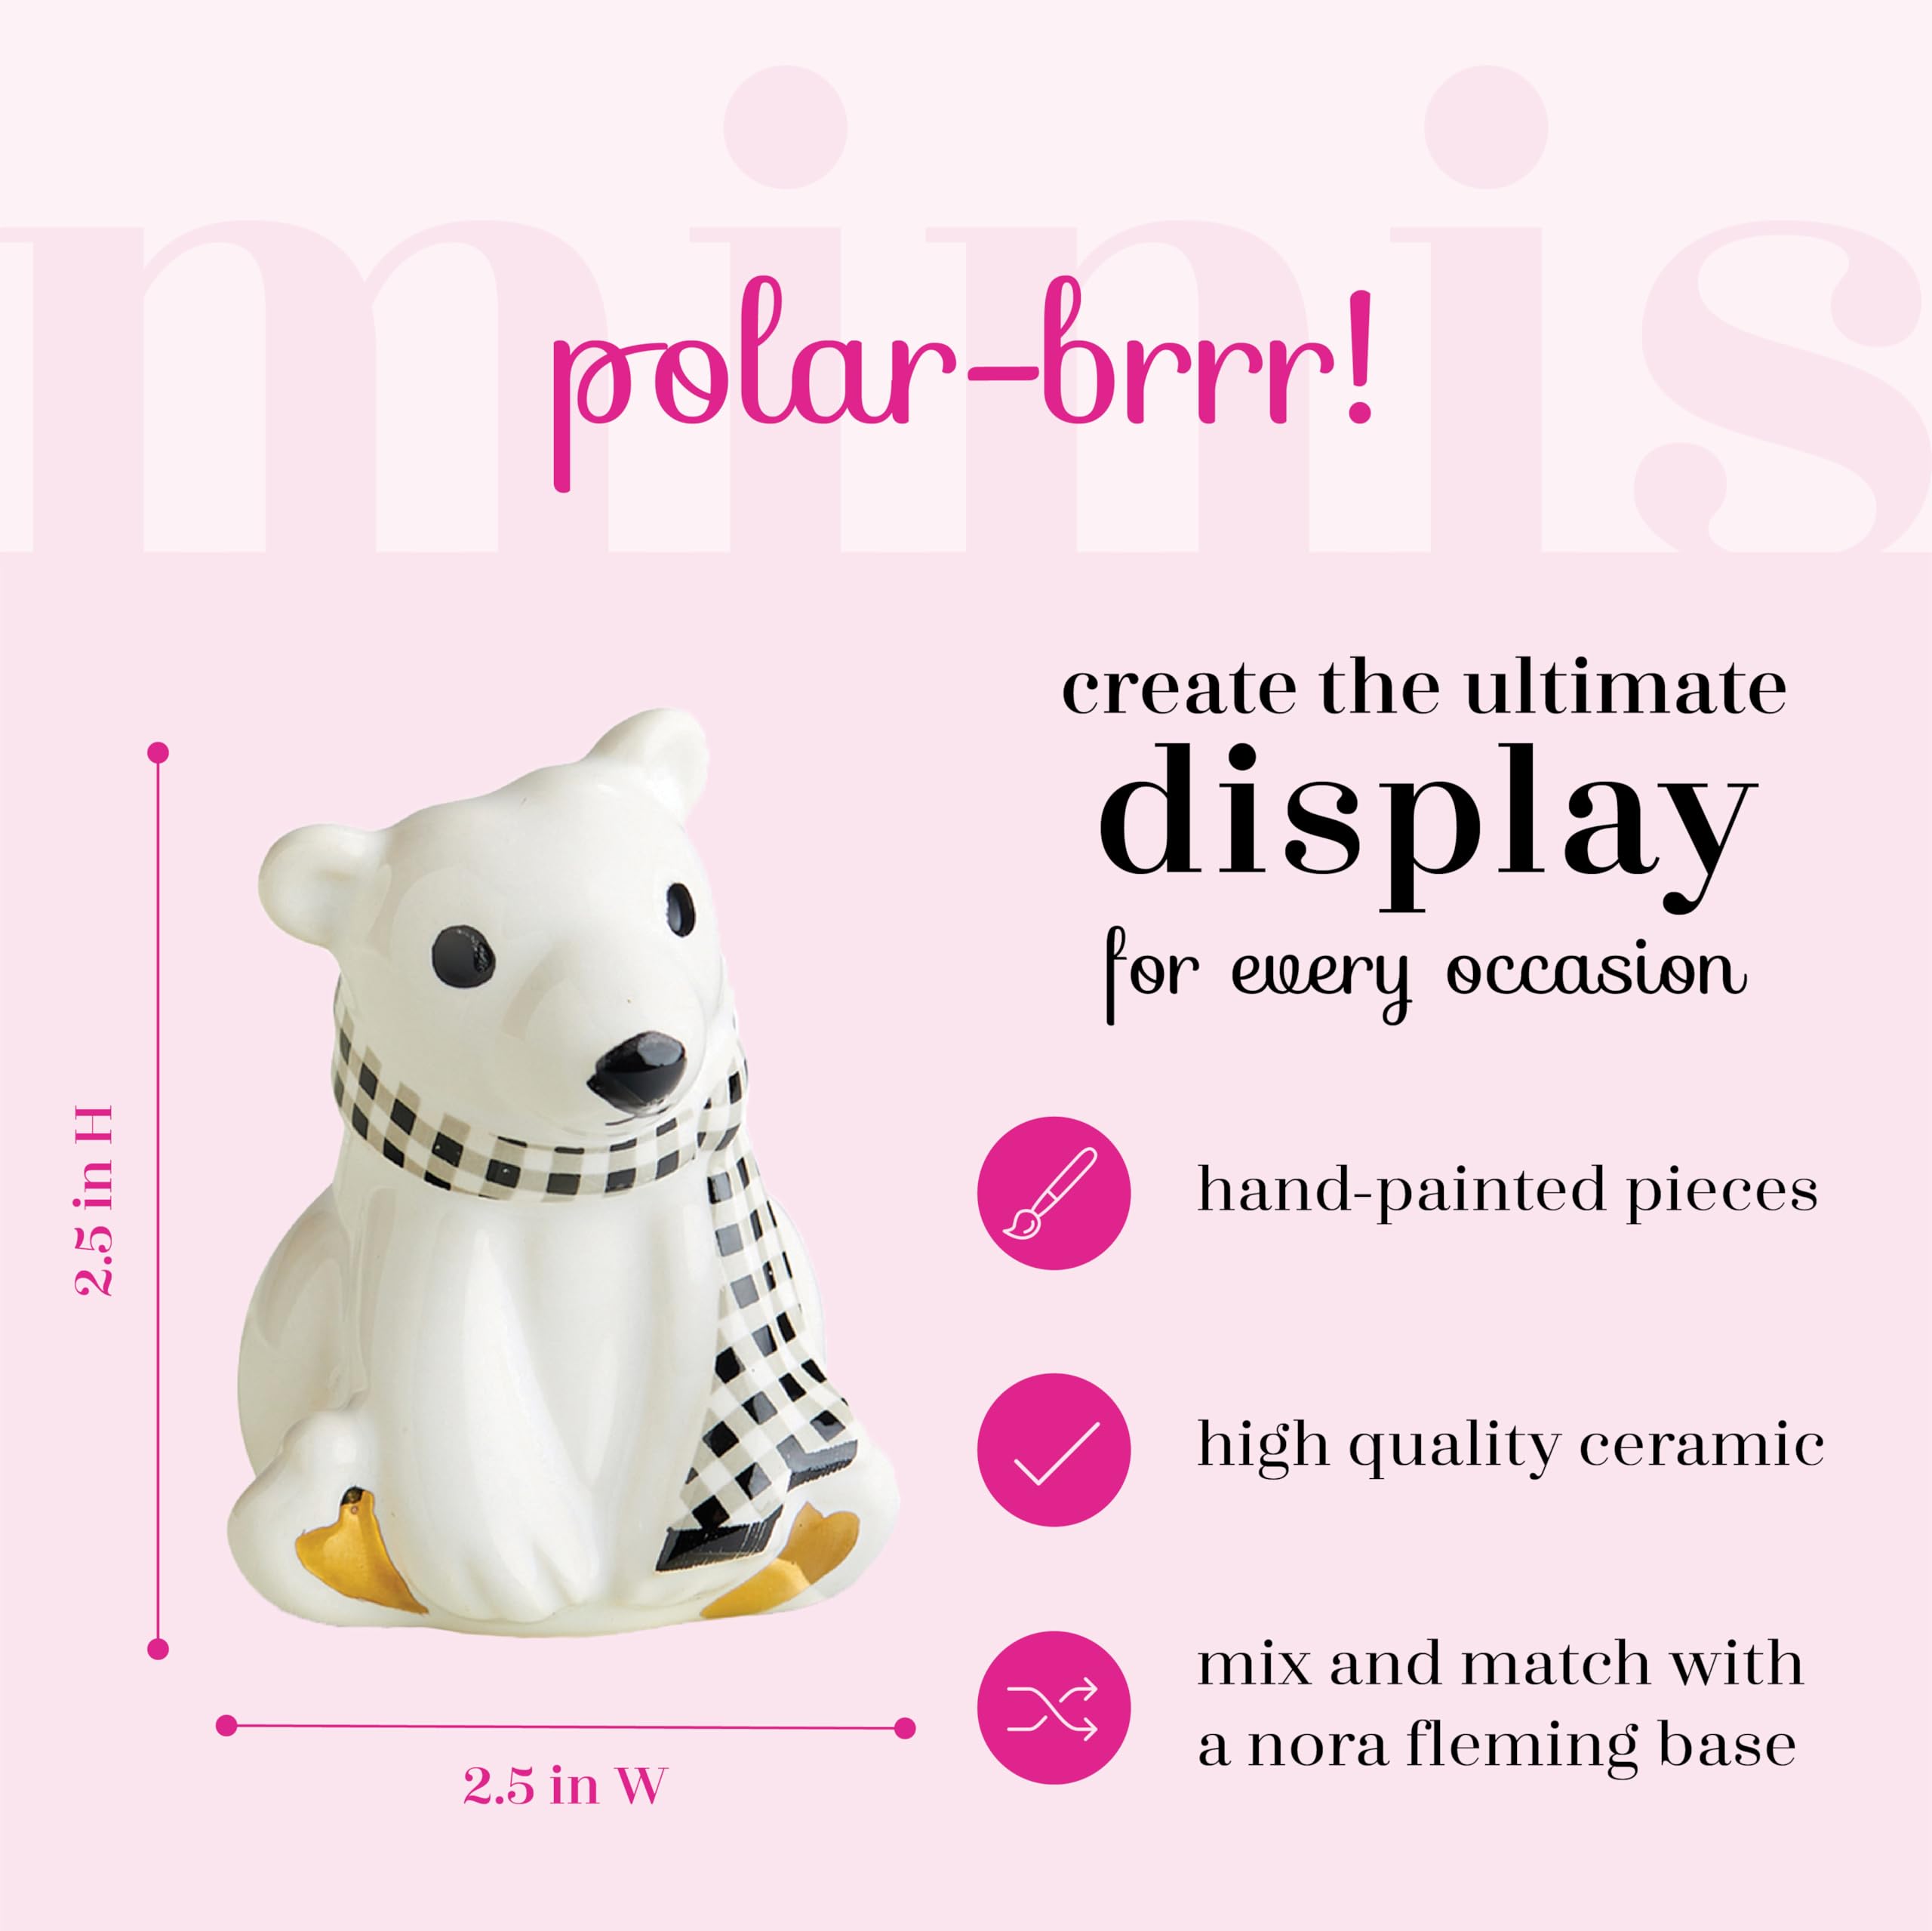 Nora Fleming Polar Brrr! (Polar Bear) - Hand-Painted Ceramic Christmas Decor - Winter Minis for The Home and Office